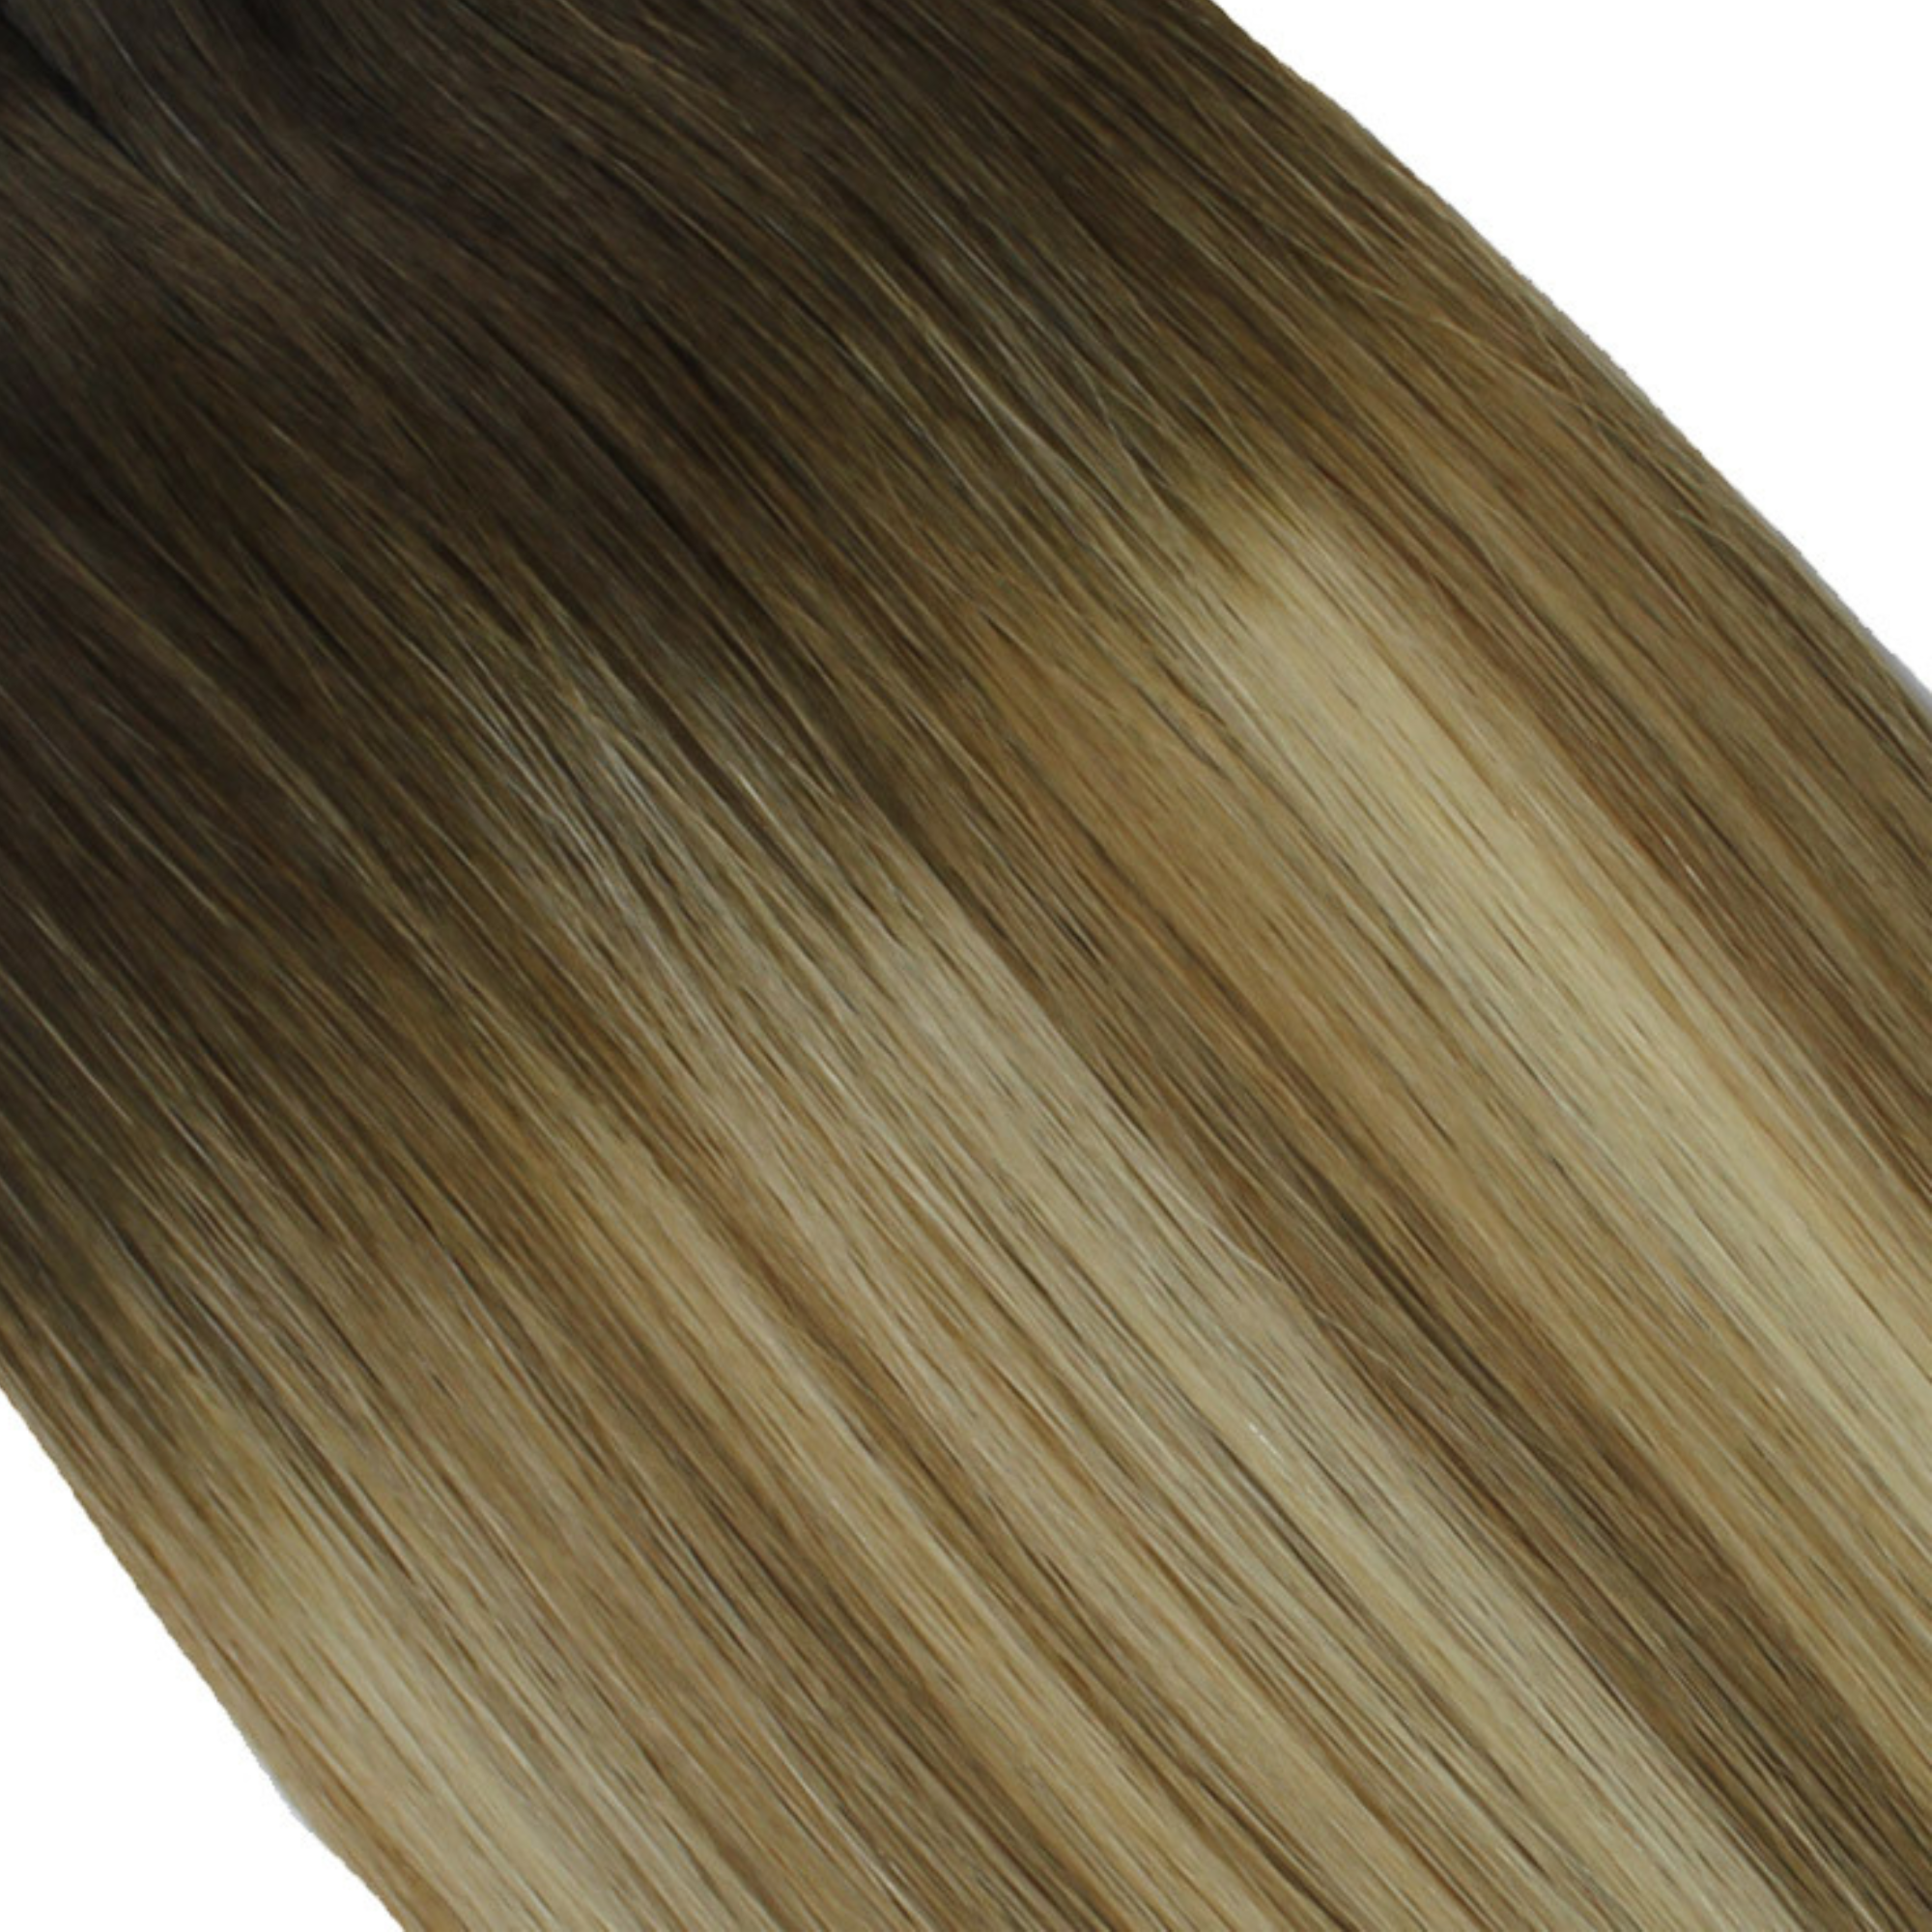 "hair rehab london 18" tape hair extensions shade swatch titled rooted supermodel"